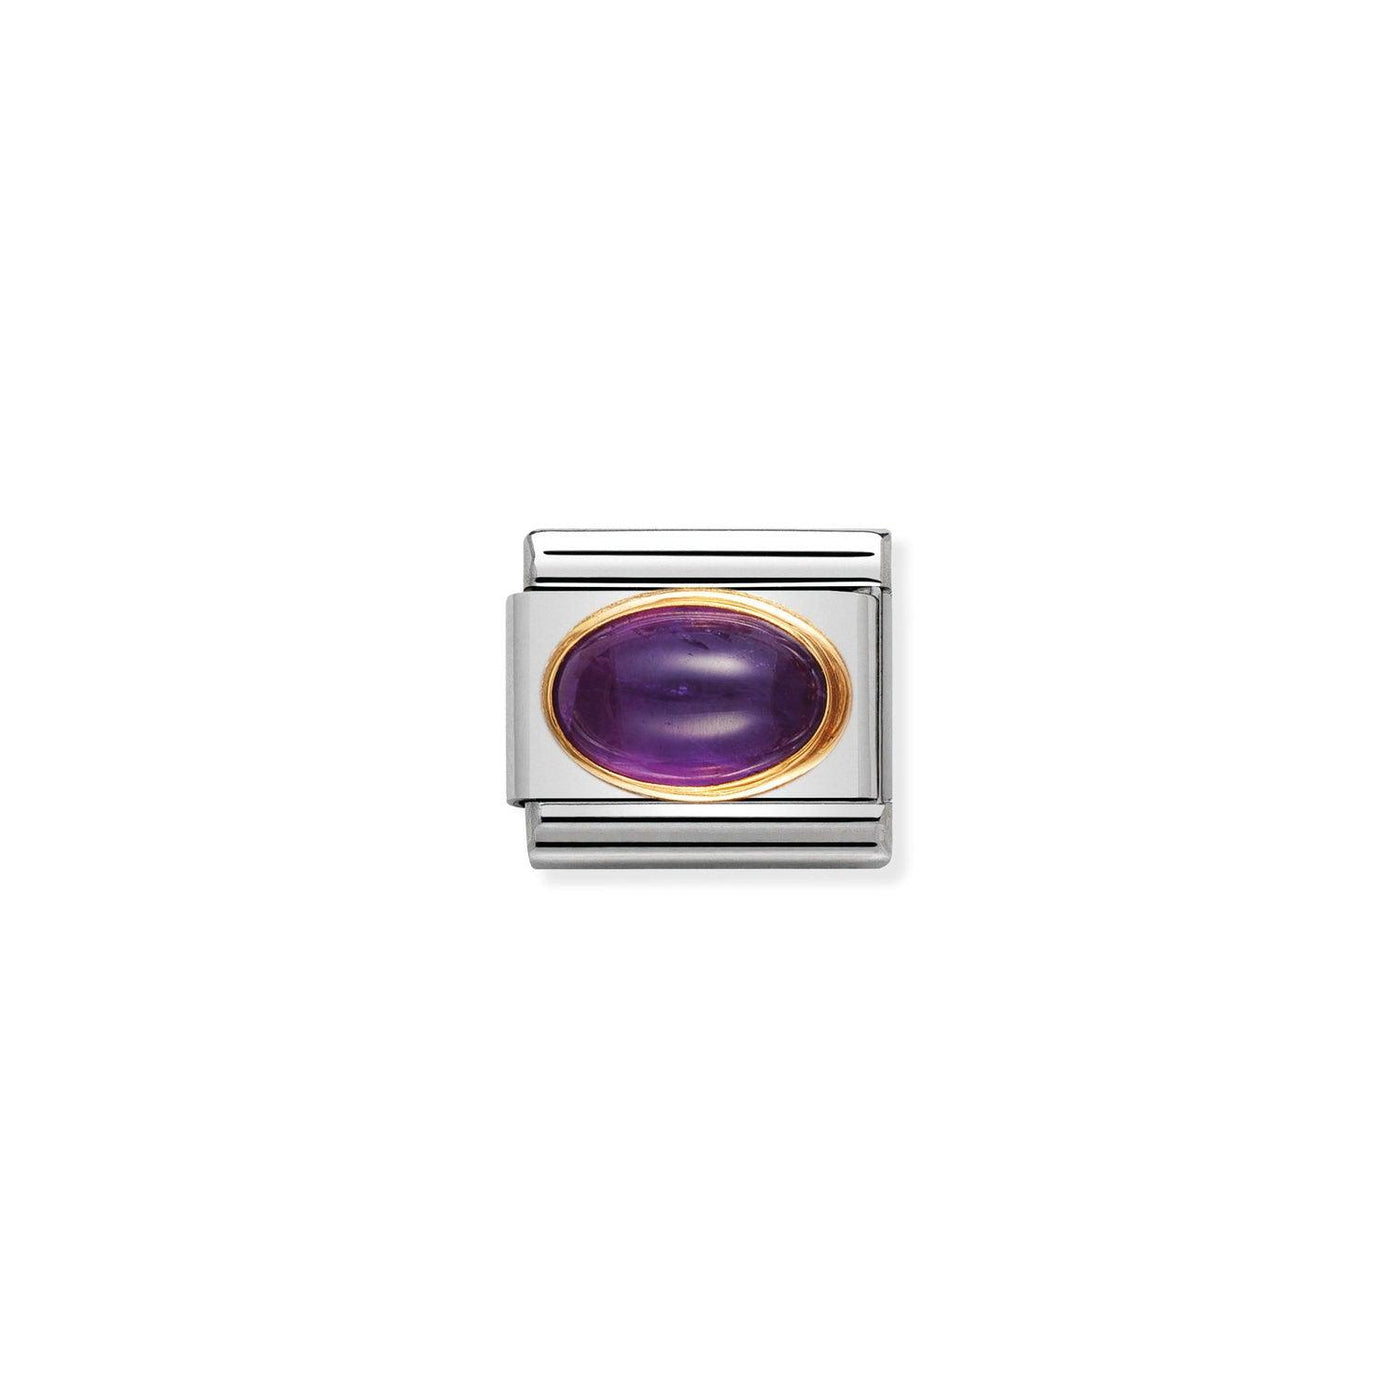 Nomination Classic Amethyst 18ct Gold Charm - Rococo Jewellery